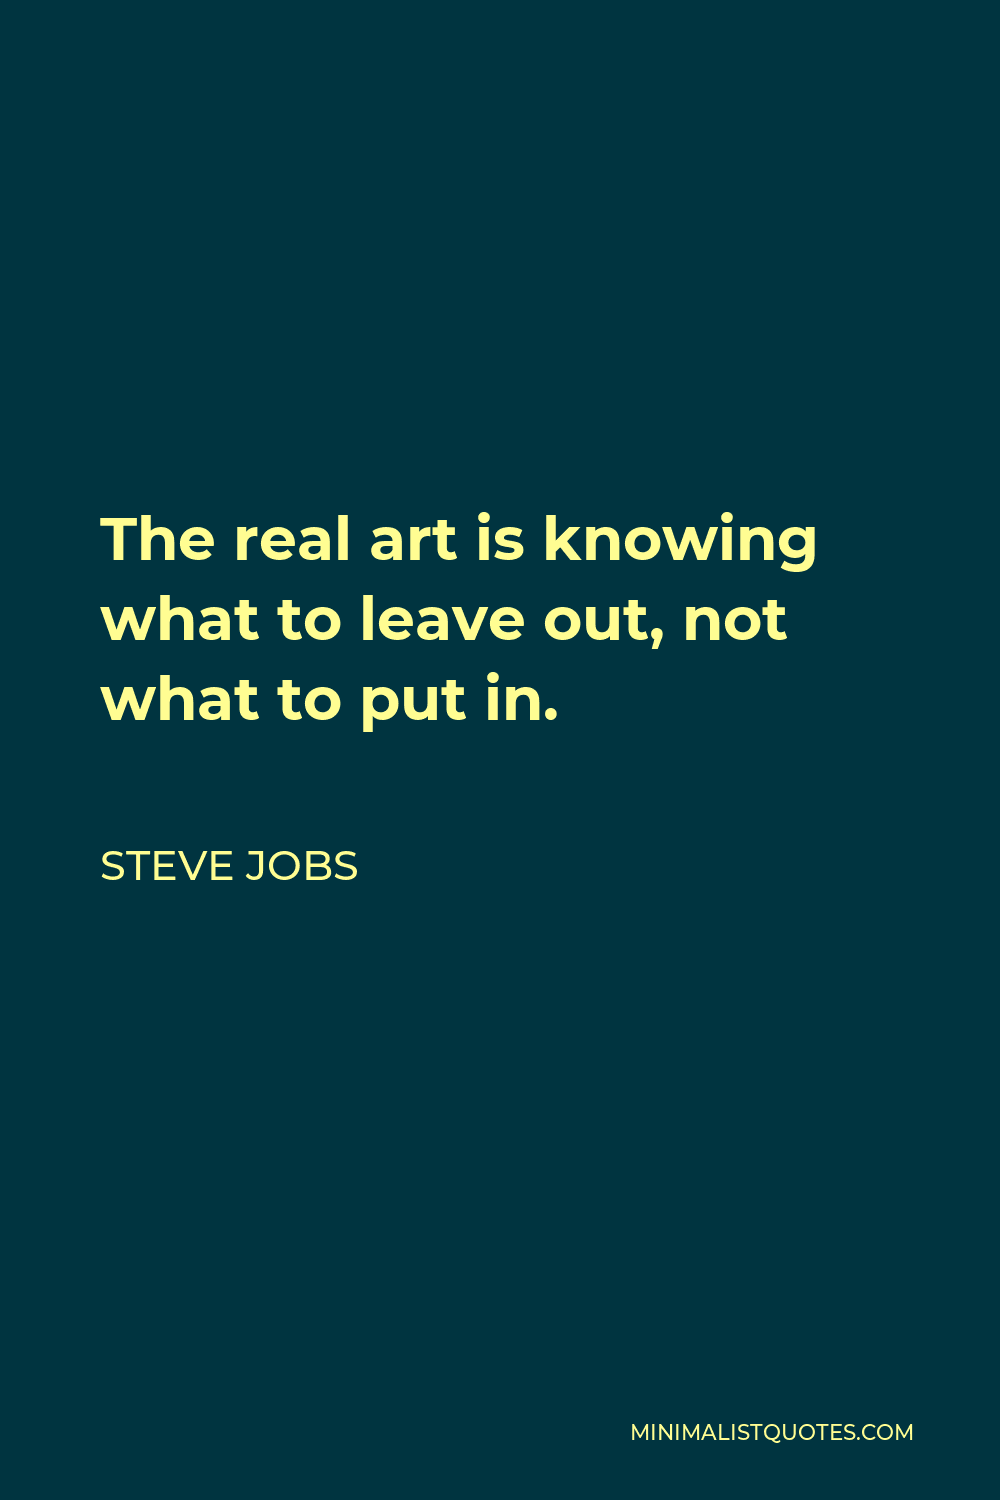 Steve Jobs Quote - The real art is knowing what to leave out, not what to put in.